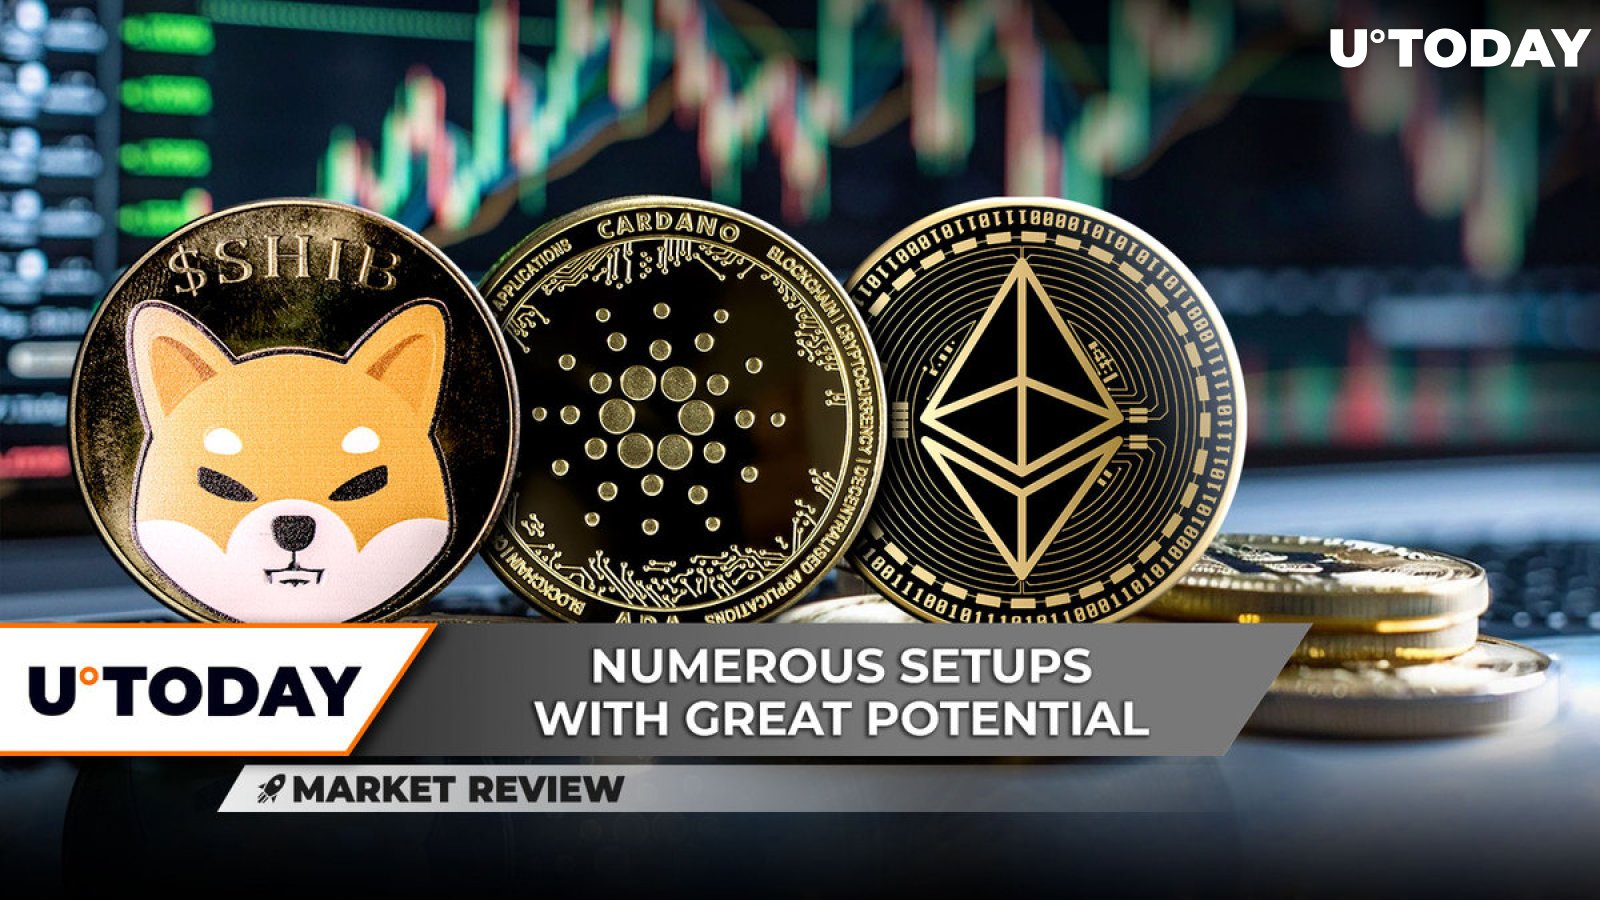 Ethereum's (ETH) $4,000 Is New Goal, Shiba Inu (SHIB) to Explode in Symmetrical Triangle, Cardano (ADA) on Verge of Reversal